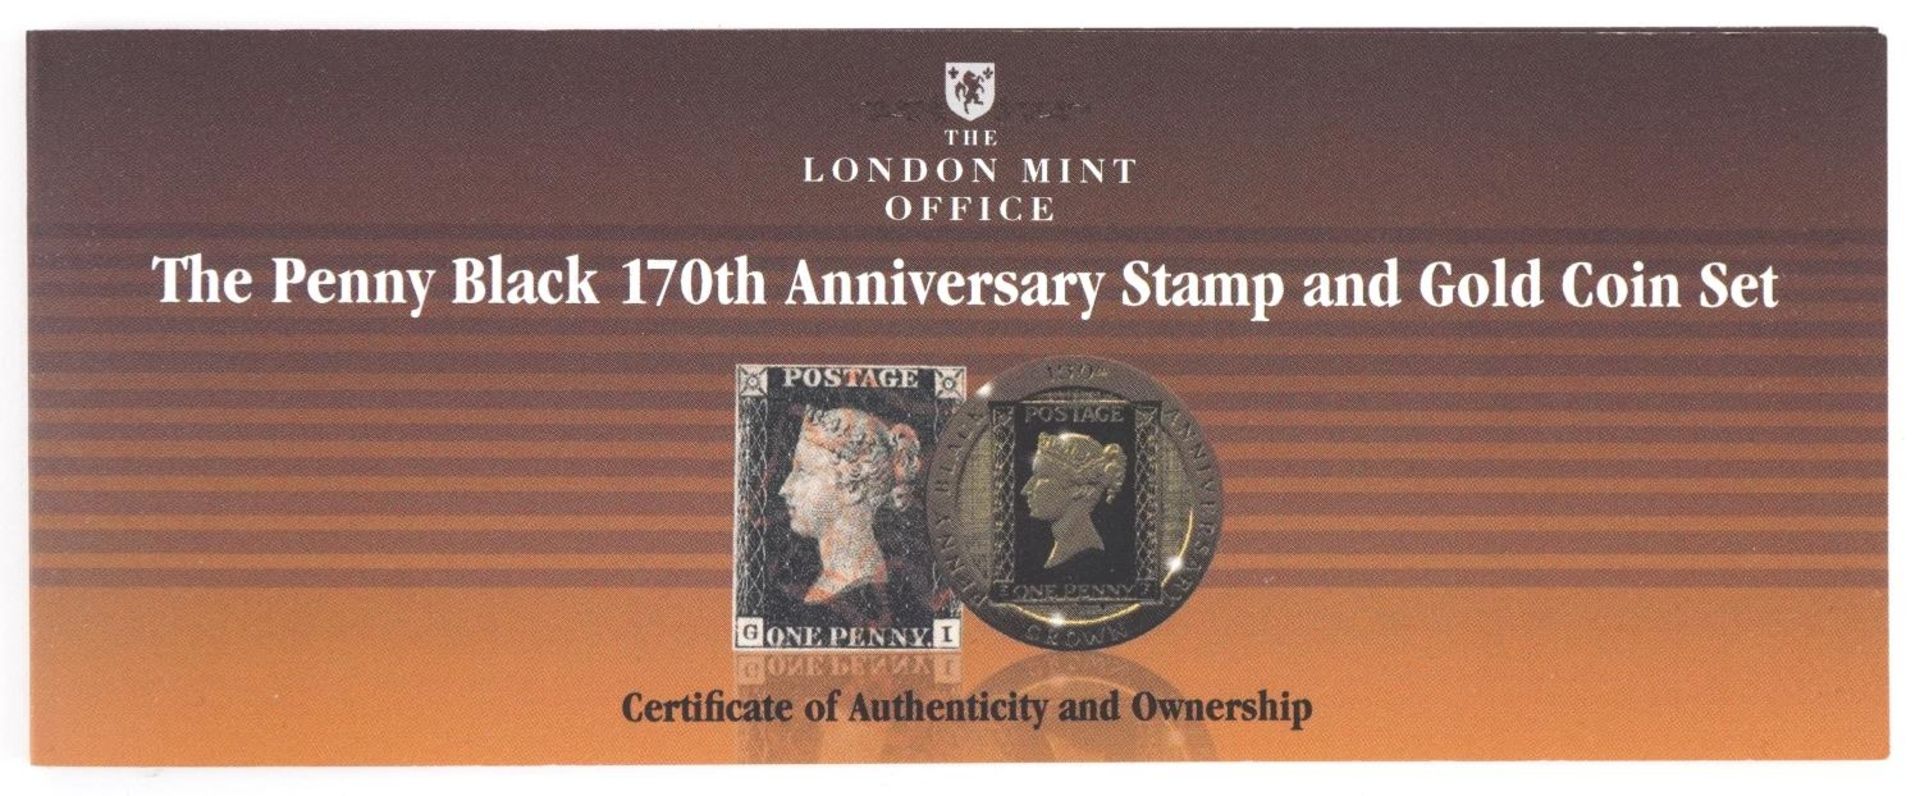 Penny Black 170th Anniversary stamp and gold coin set by The London Mint Office with certificate and - Image 4 of 5